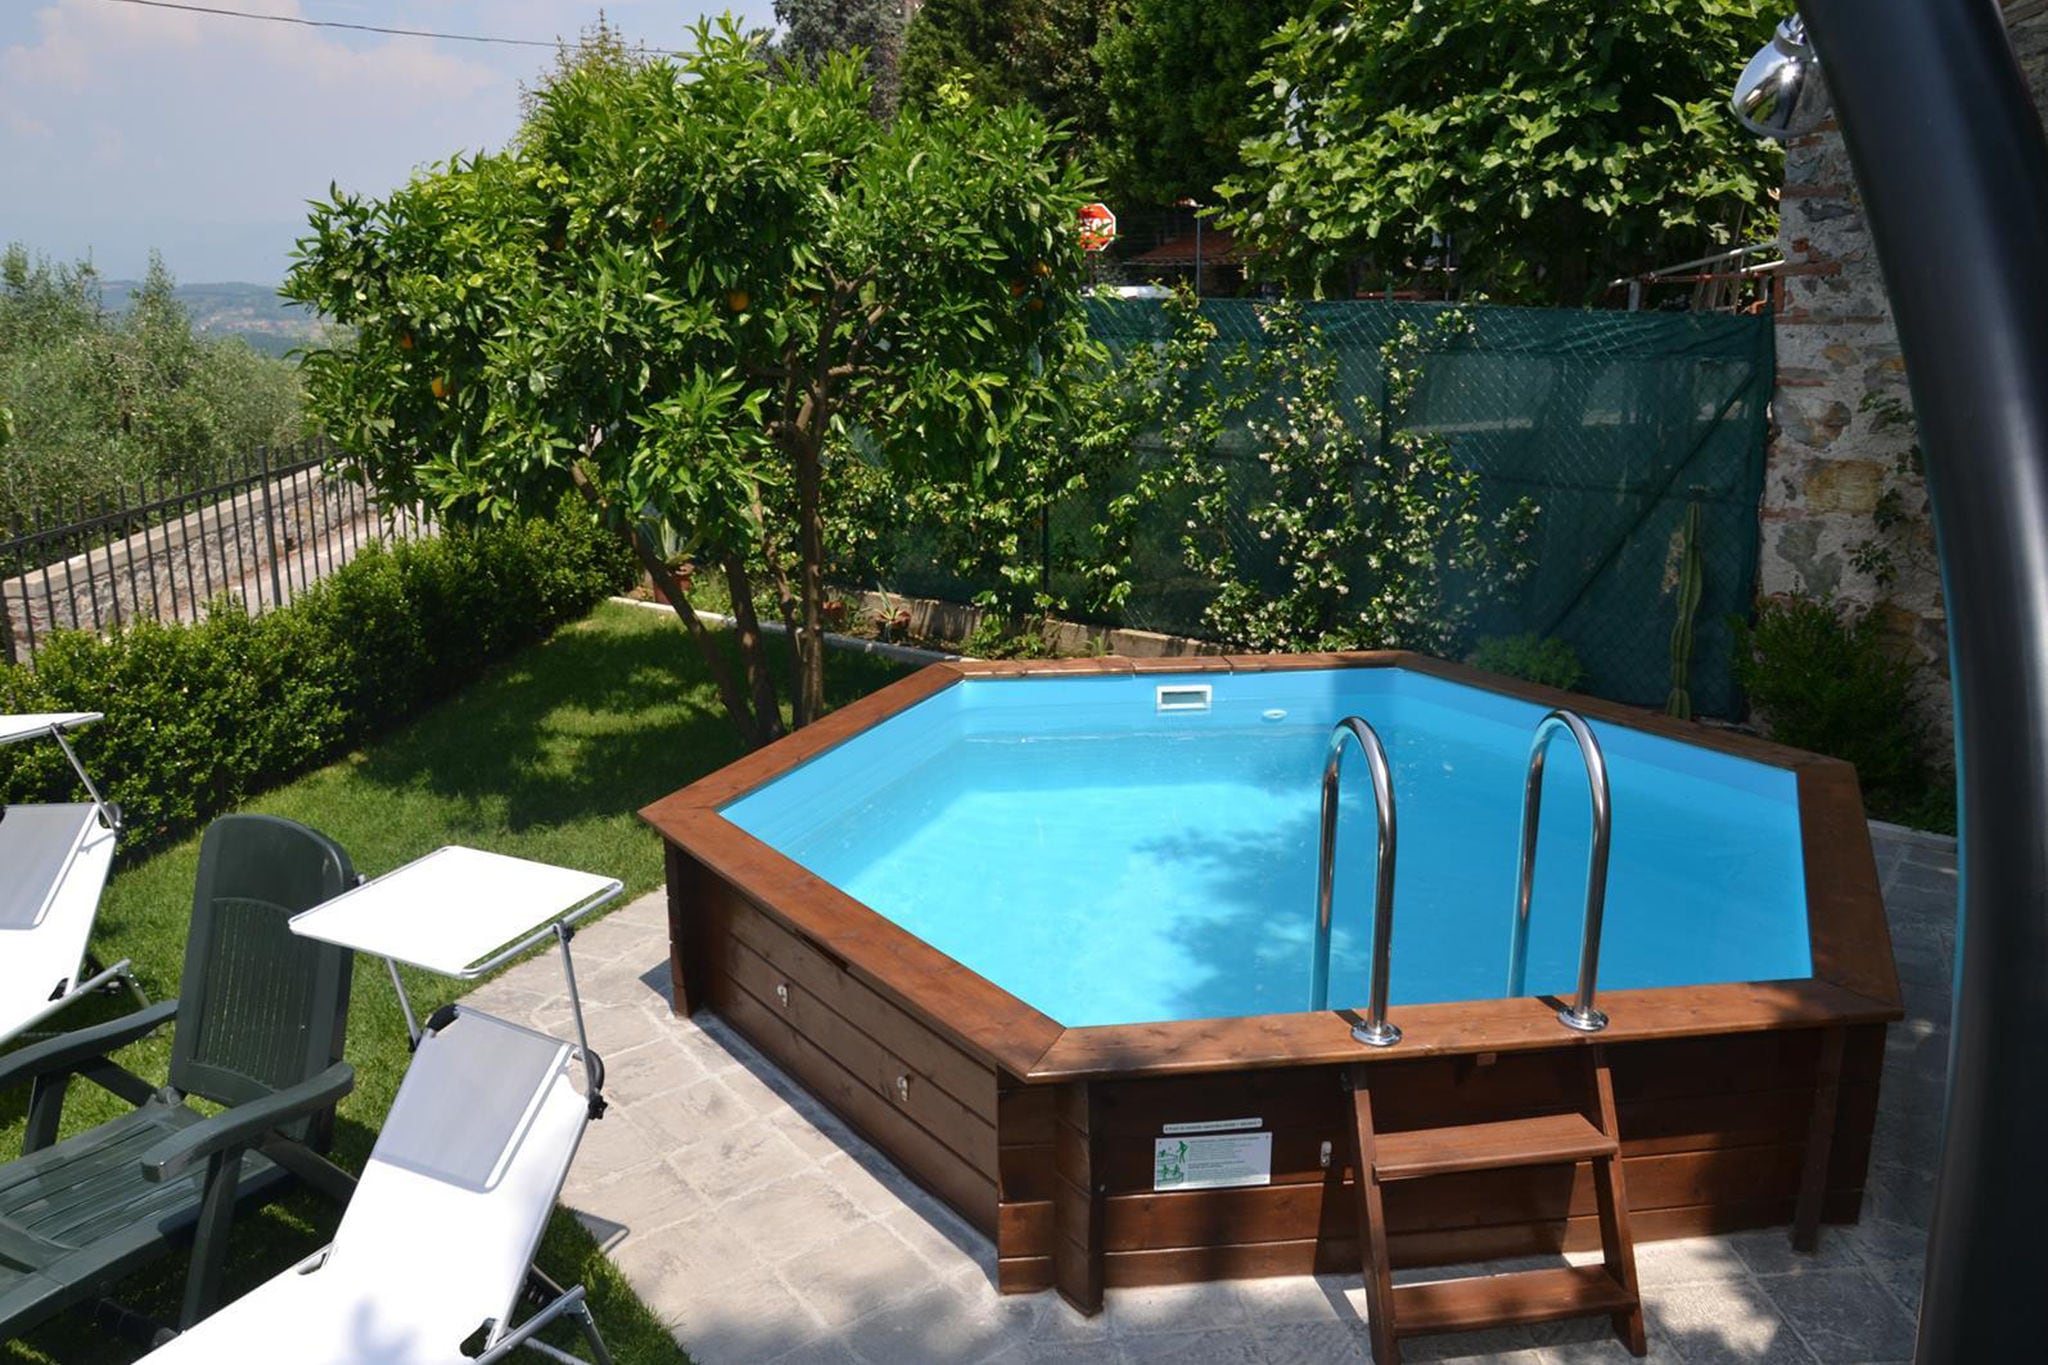 Modern villa with private pool and fenced garden 12 km from Lucca